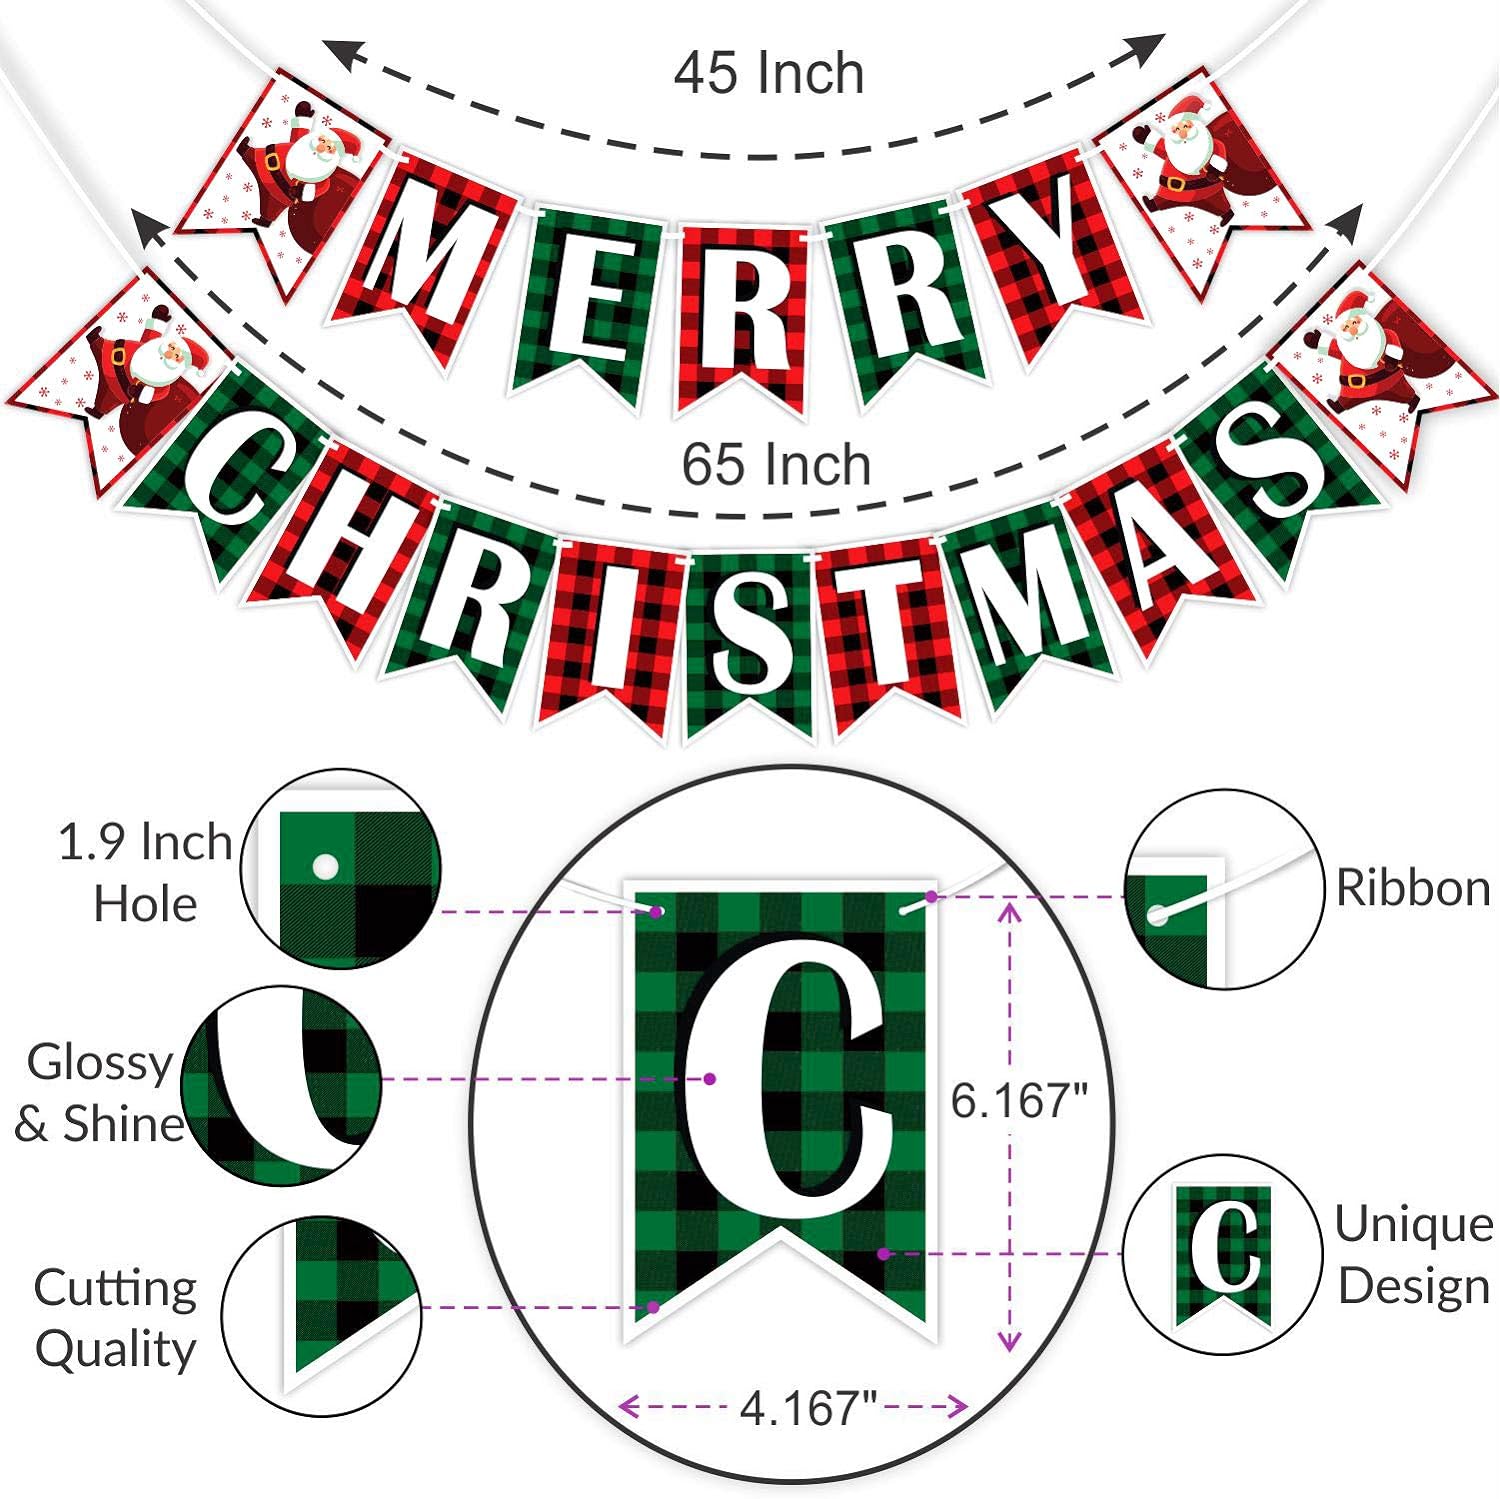 eCraftIndia Merry Christmas Santa Bunting Banner, Christmas Decorations Item for Home, Office (Red, Green, White) 4